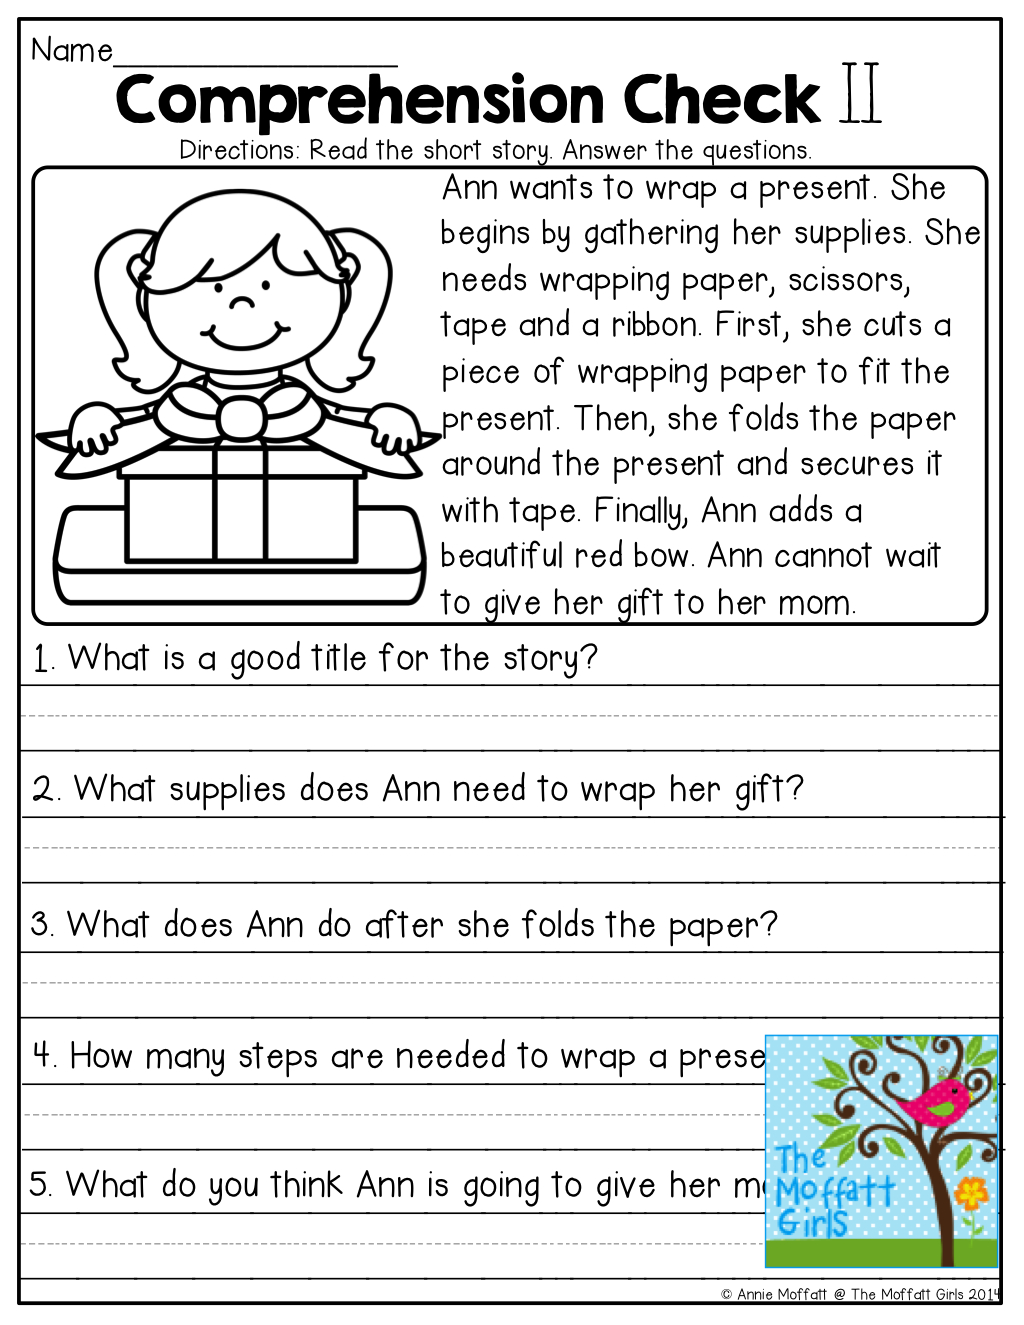 examples of short stories for grade 3